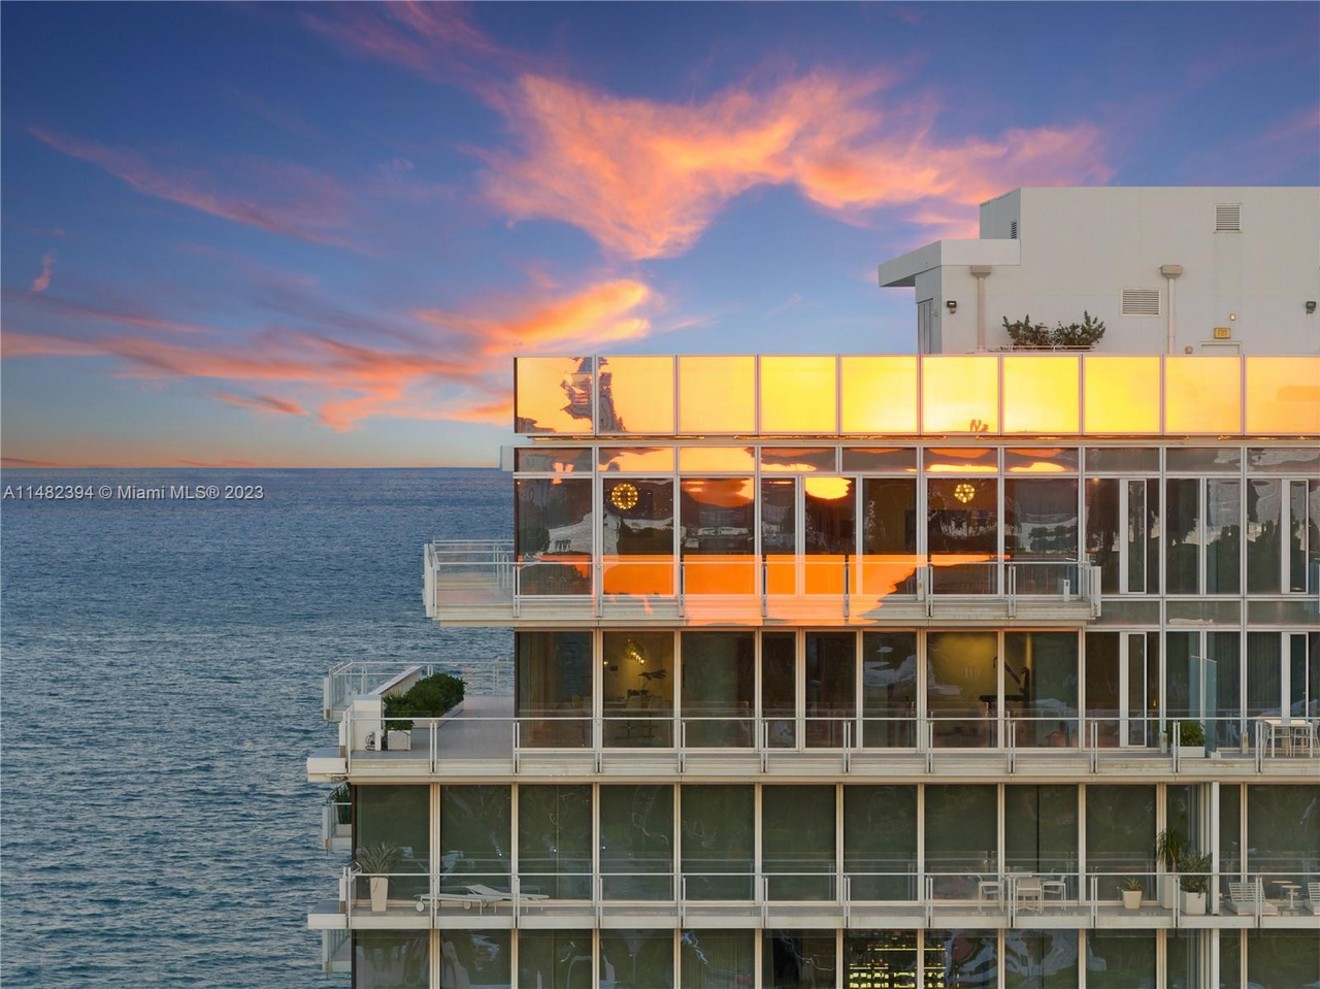 Built in 2017, the penthouse at The Surf Club in Surfside previously sold for more than $29 million.